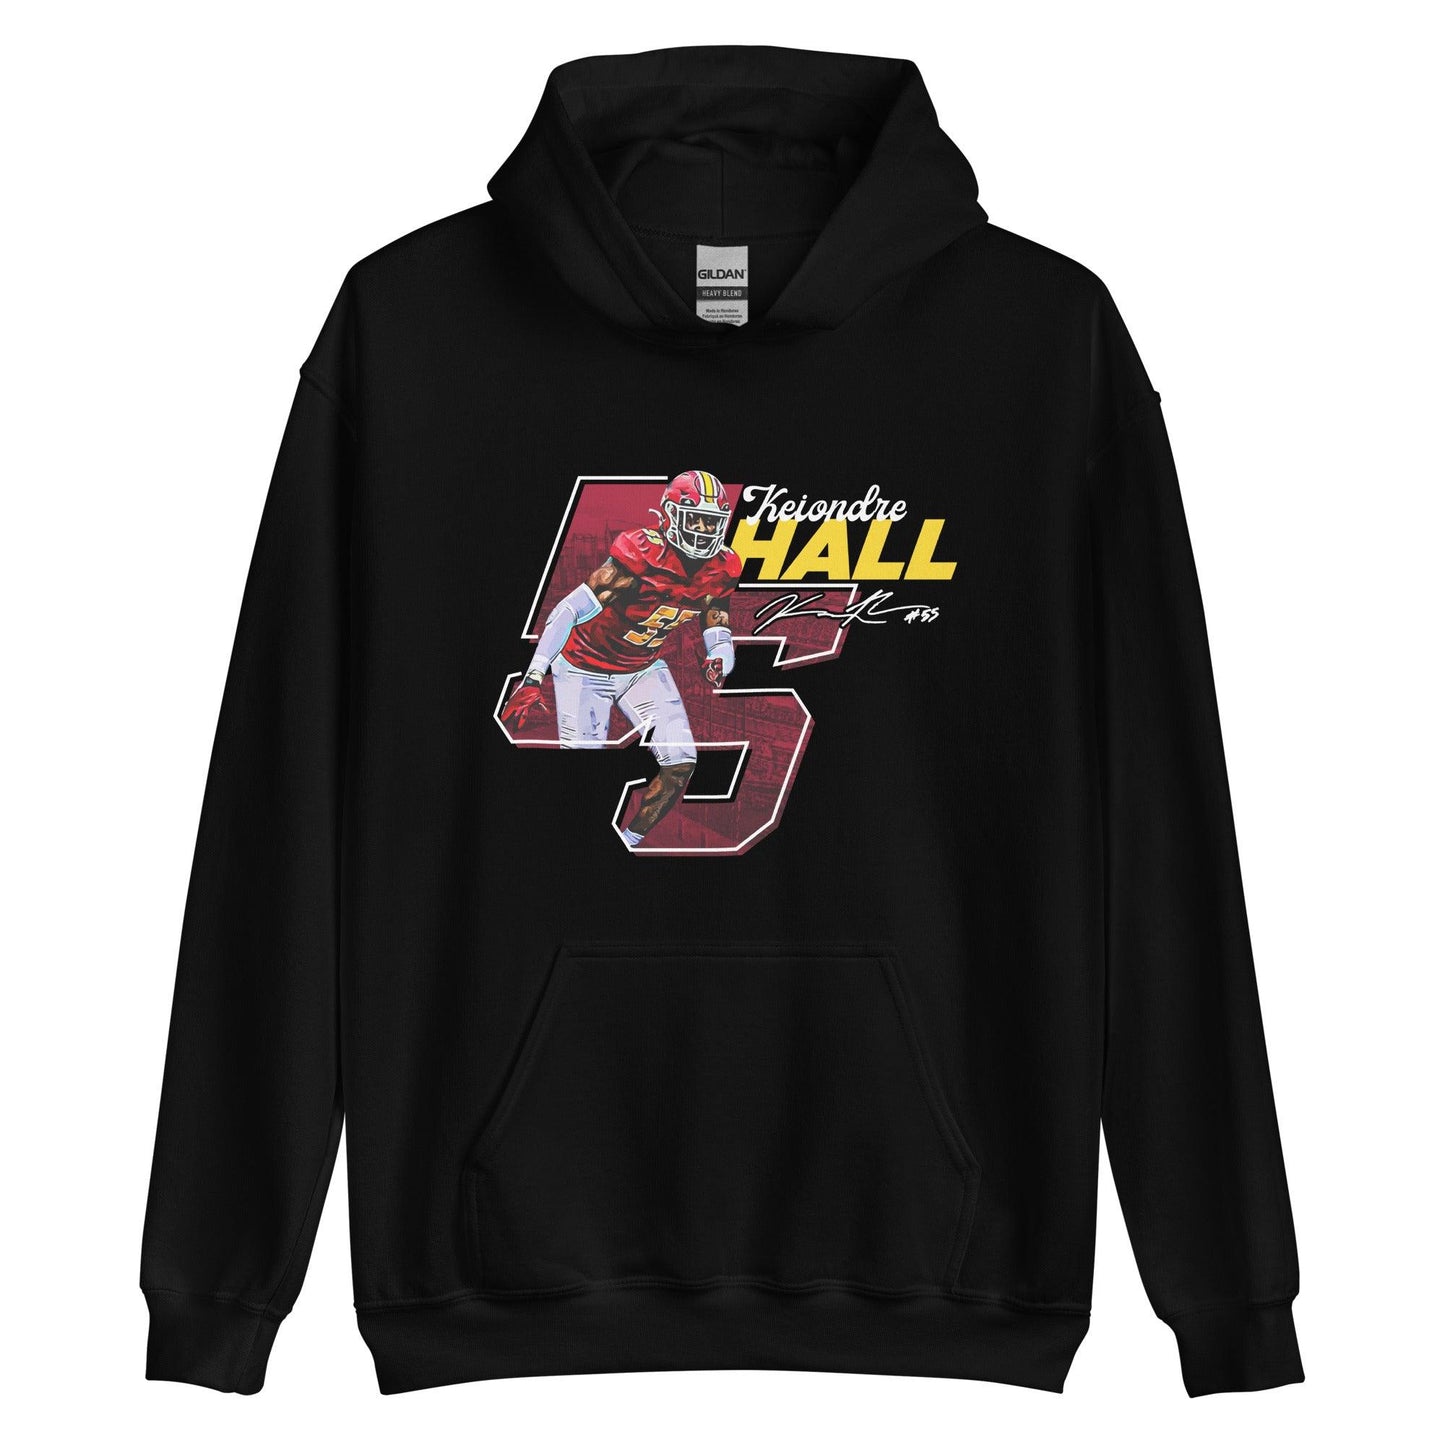 Keiondre Hall "Signature" Hoodie - Fan Arch